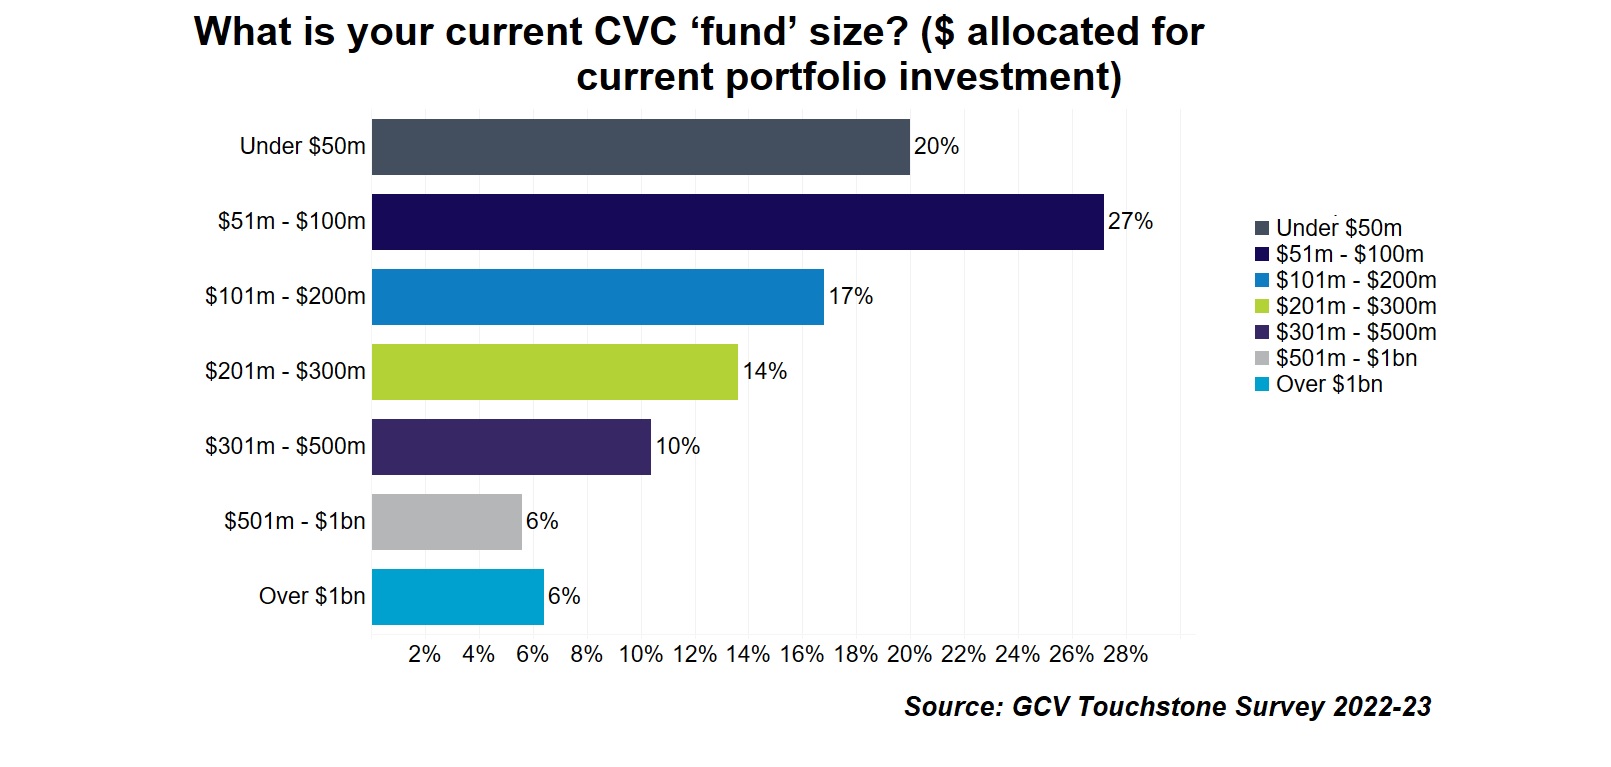 Chart showing CVC fund size according to the GCV Touchstone 2022-23 annual survey